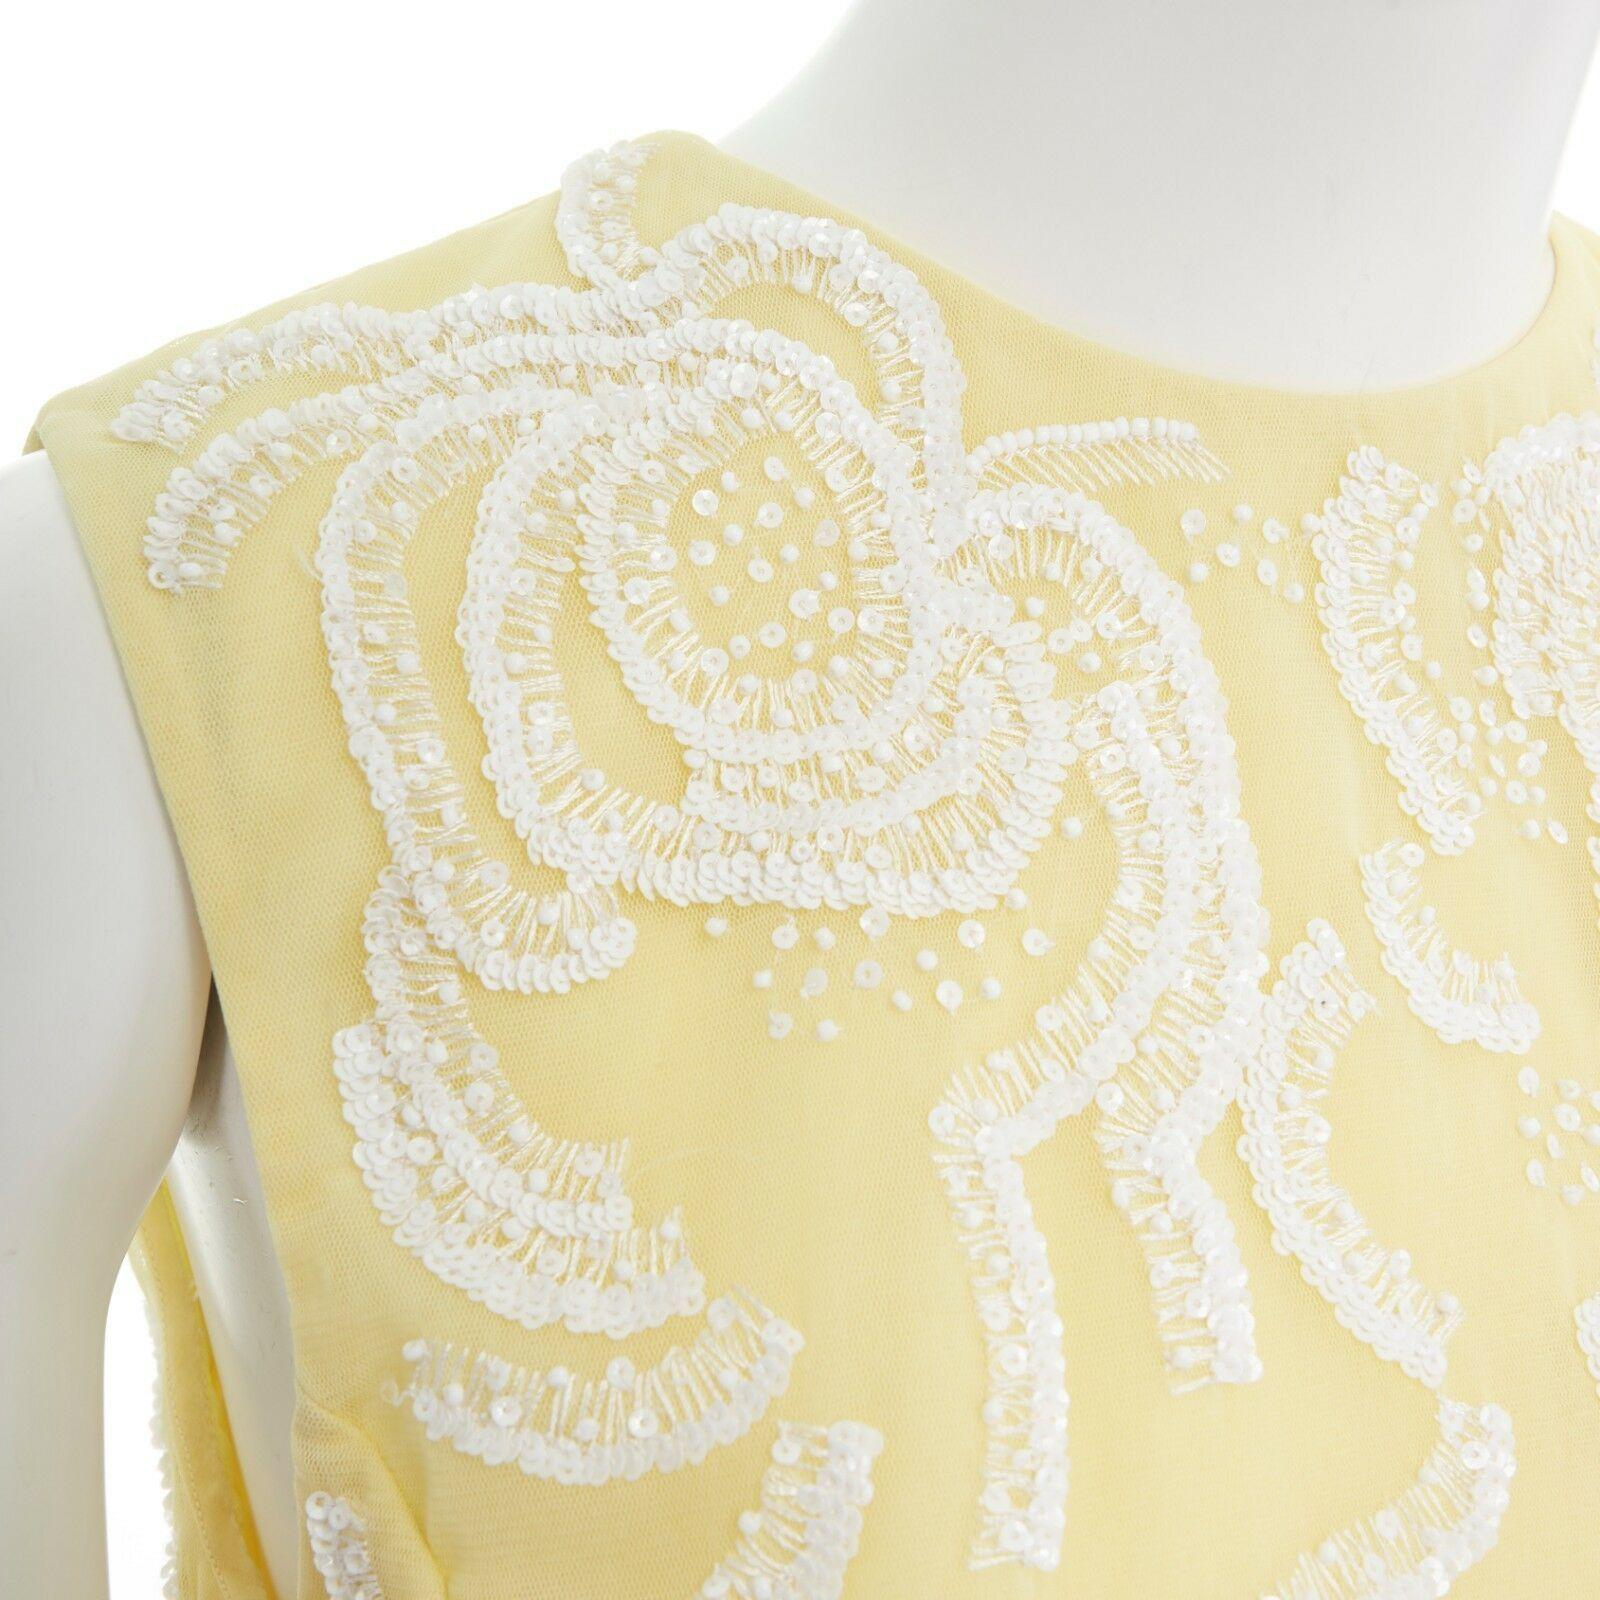 runway CHRISTOPHER KANE SS10 yellow sequins lace nude tulle insert dress UK6 XS 2